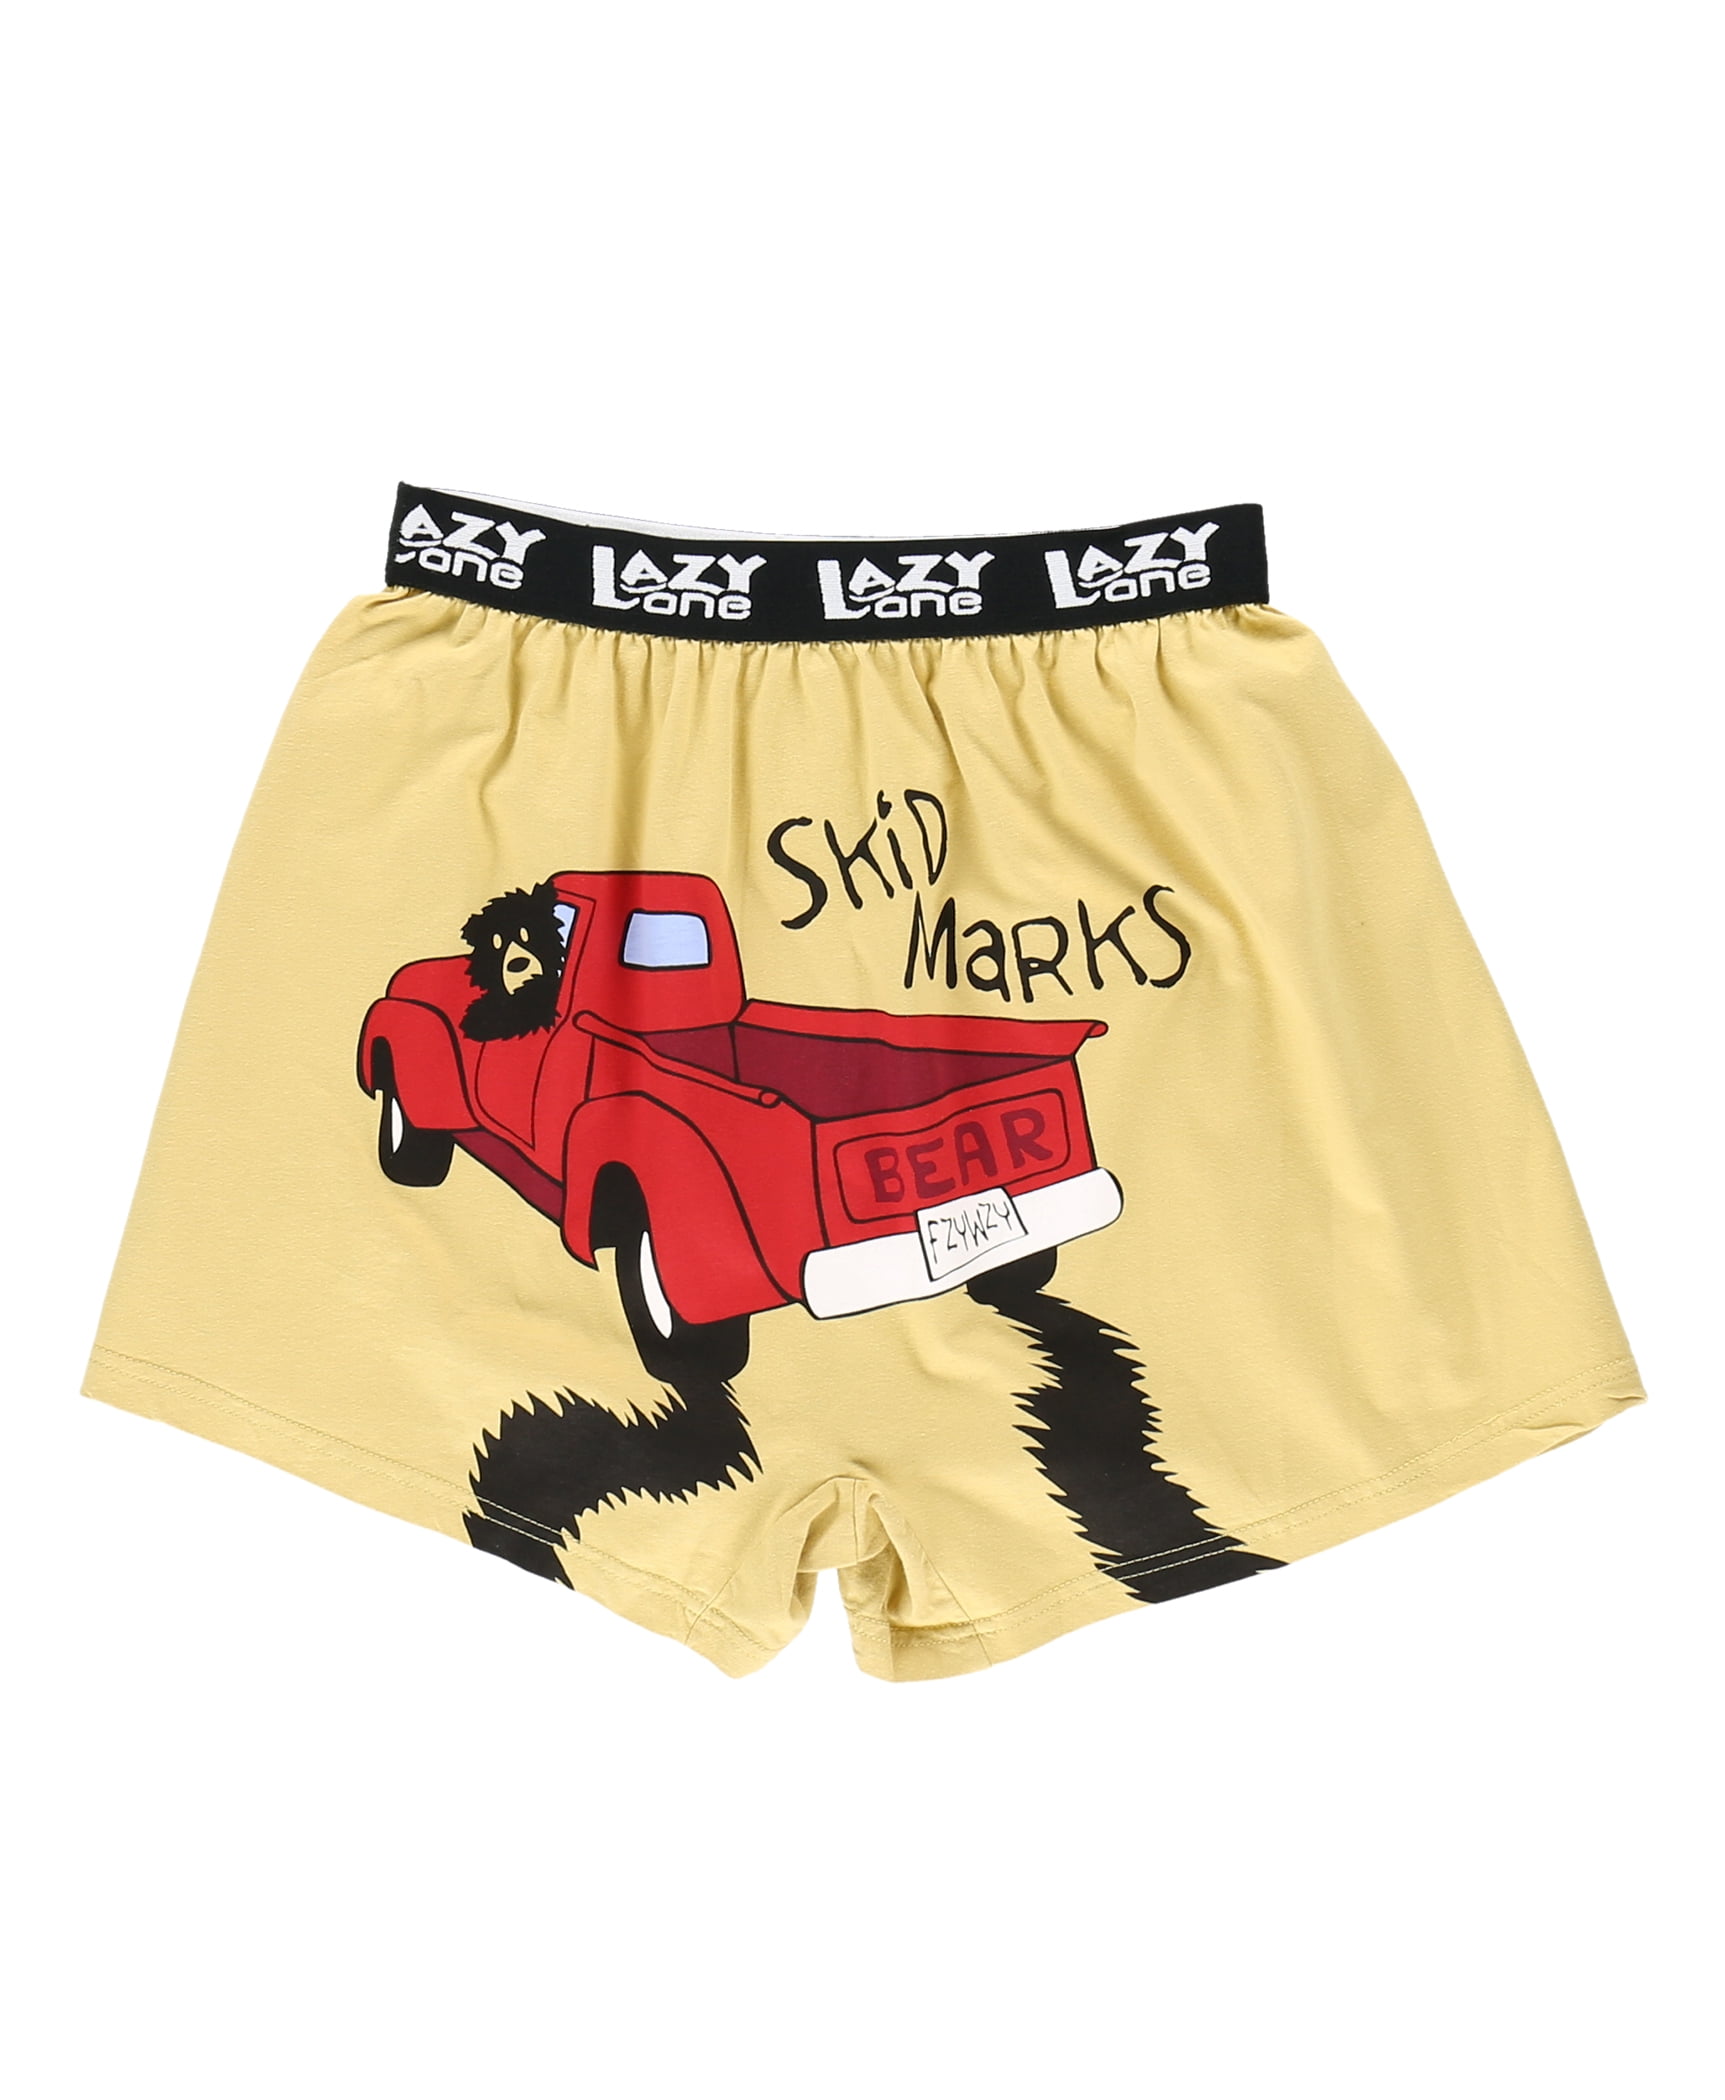 LazyOne Funny Animal Boxers, Skid Marks, Humorous Underwear, Gag Gifts for  Men (Large)